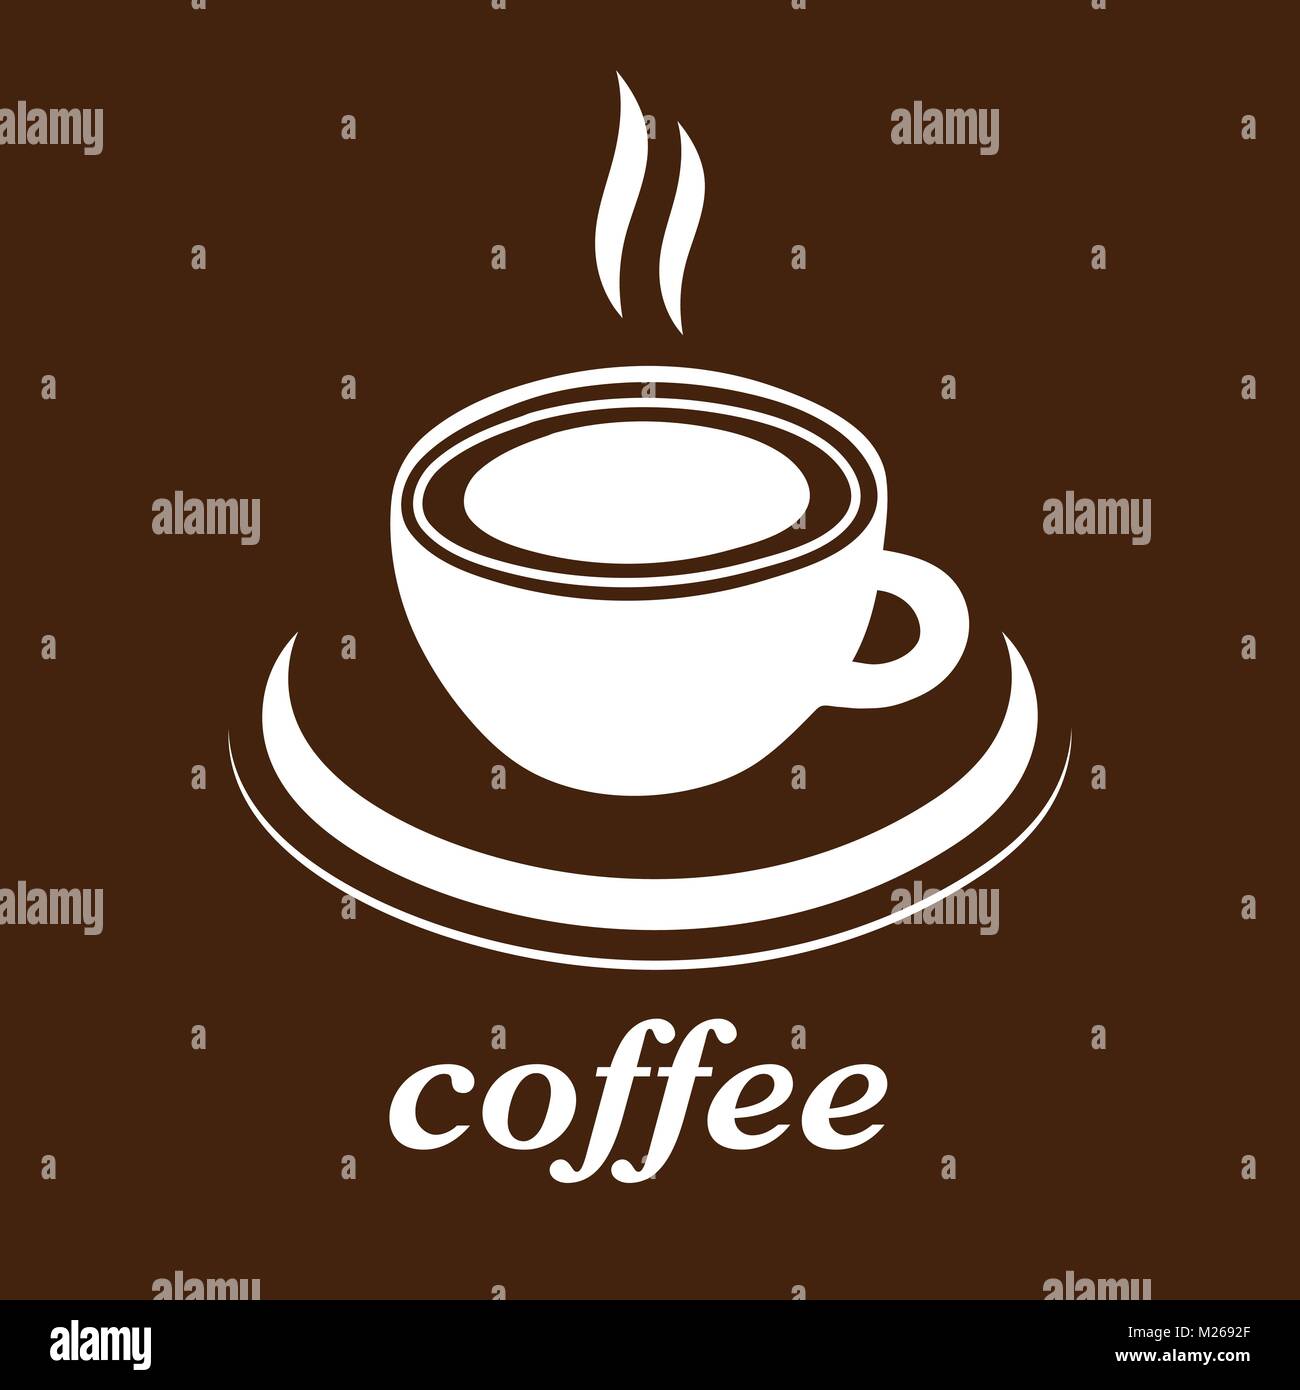 Cup of coffee vector icon, logo, sign, emblem. White abstract coffee cup and saucer and the inscription, isolated on brown background Stock Vector